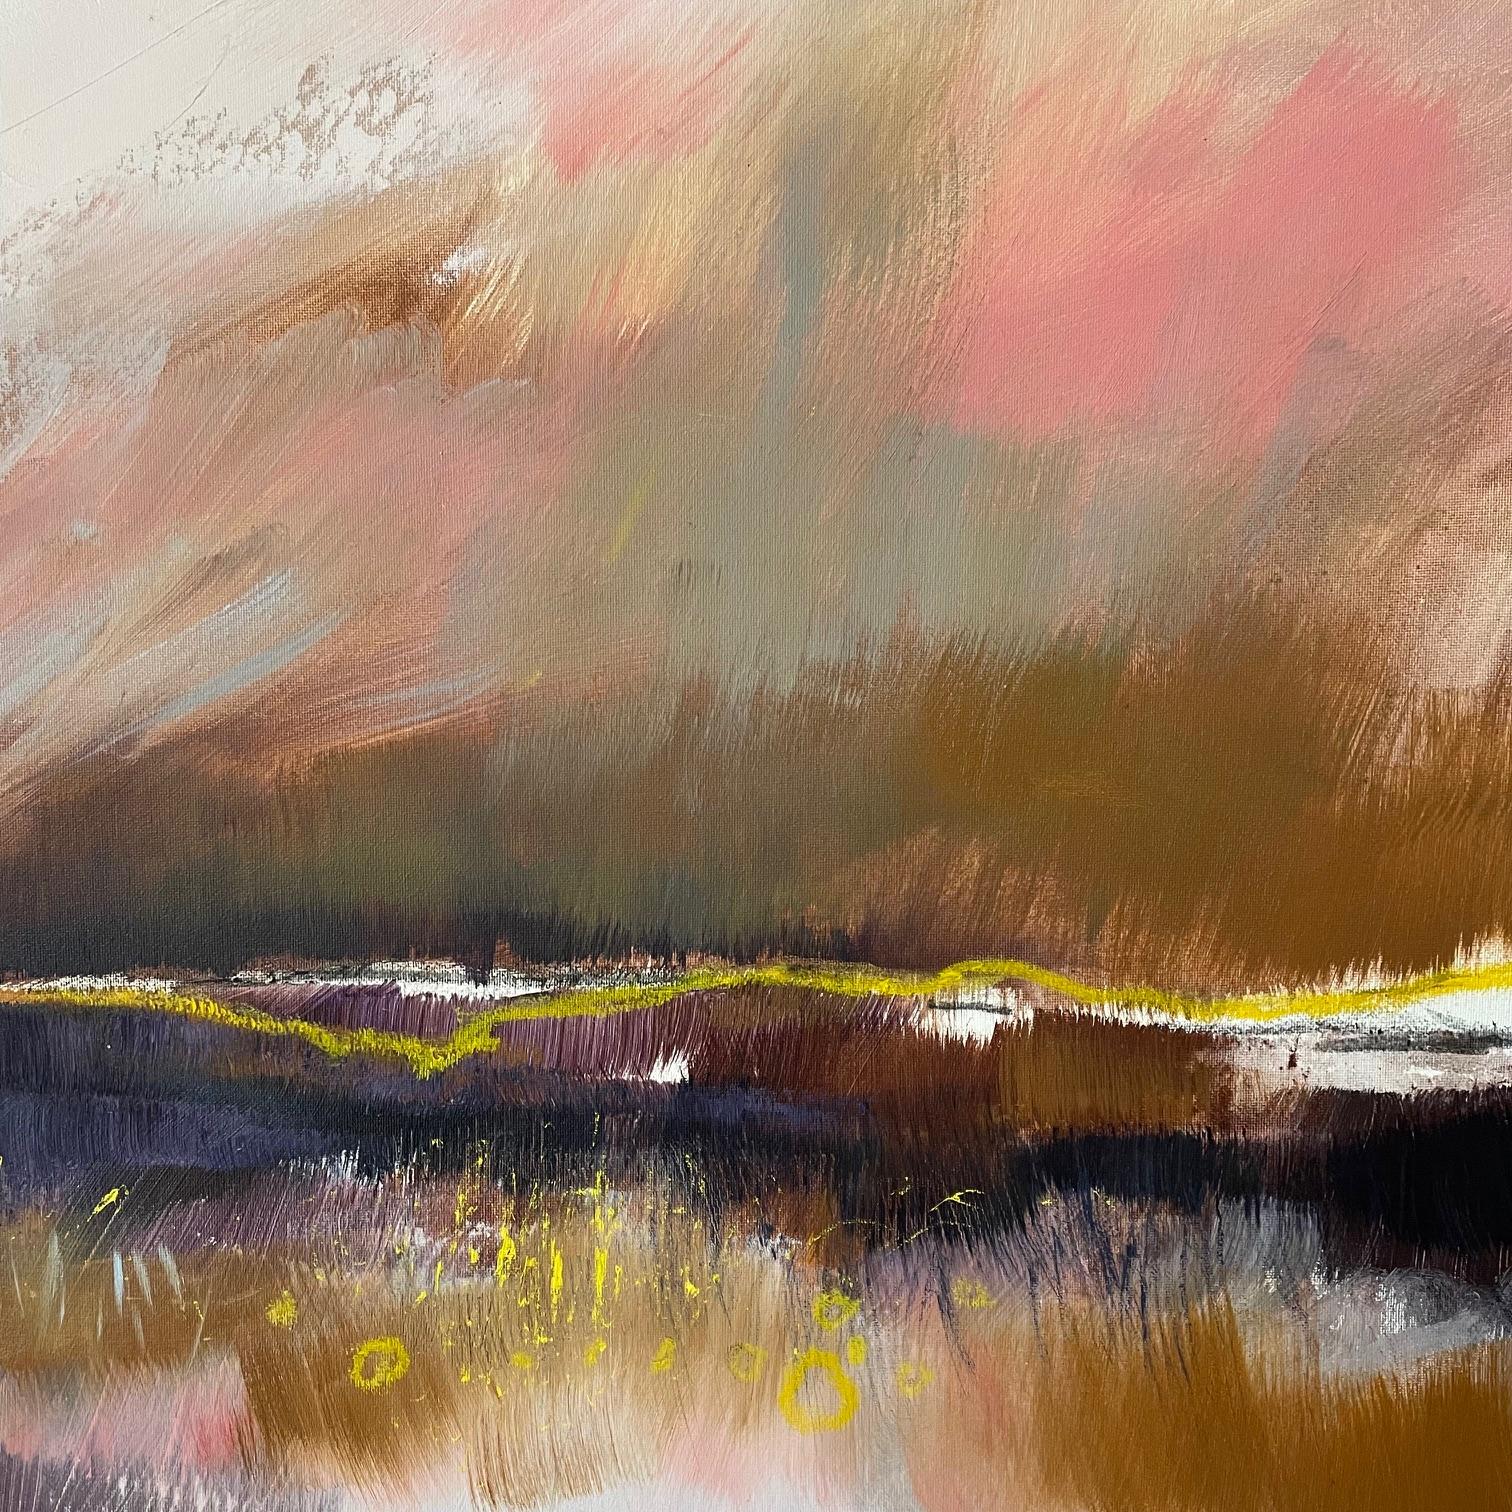 Calm and Peace is a piece inspired by the open landscape and moors. Being out in big spaces with big skies always brings a sense of calm and tranquility. I've worked on this painting in layers starting with acrylics and charcoal and working in